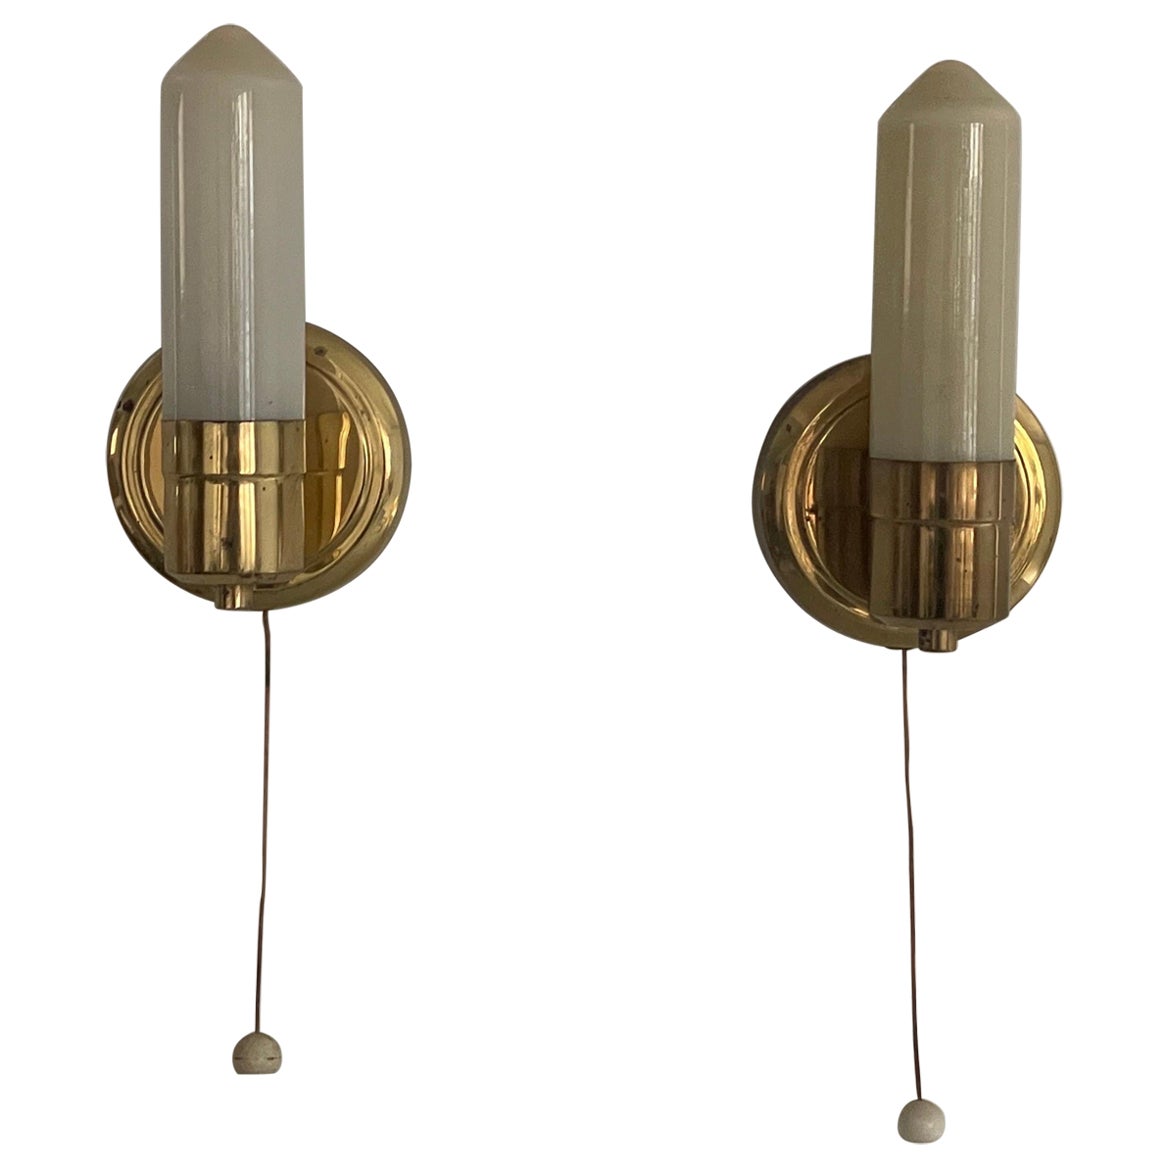 Art Deco Opaline Glass and Brass Sconces, 1940s, Germany For Sale